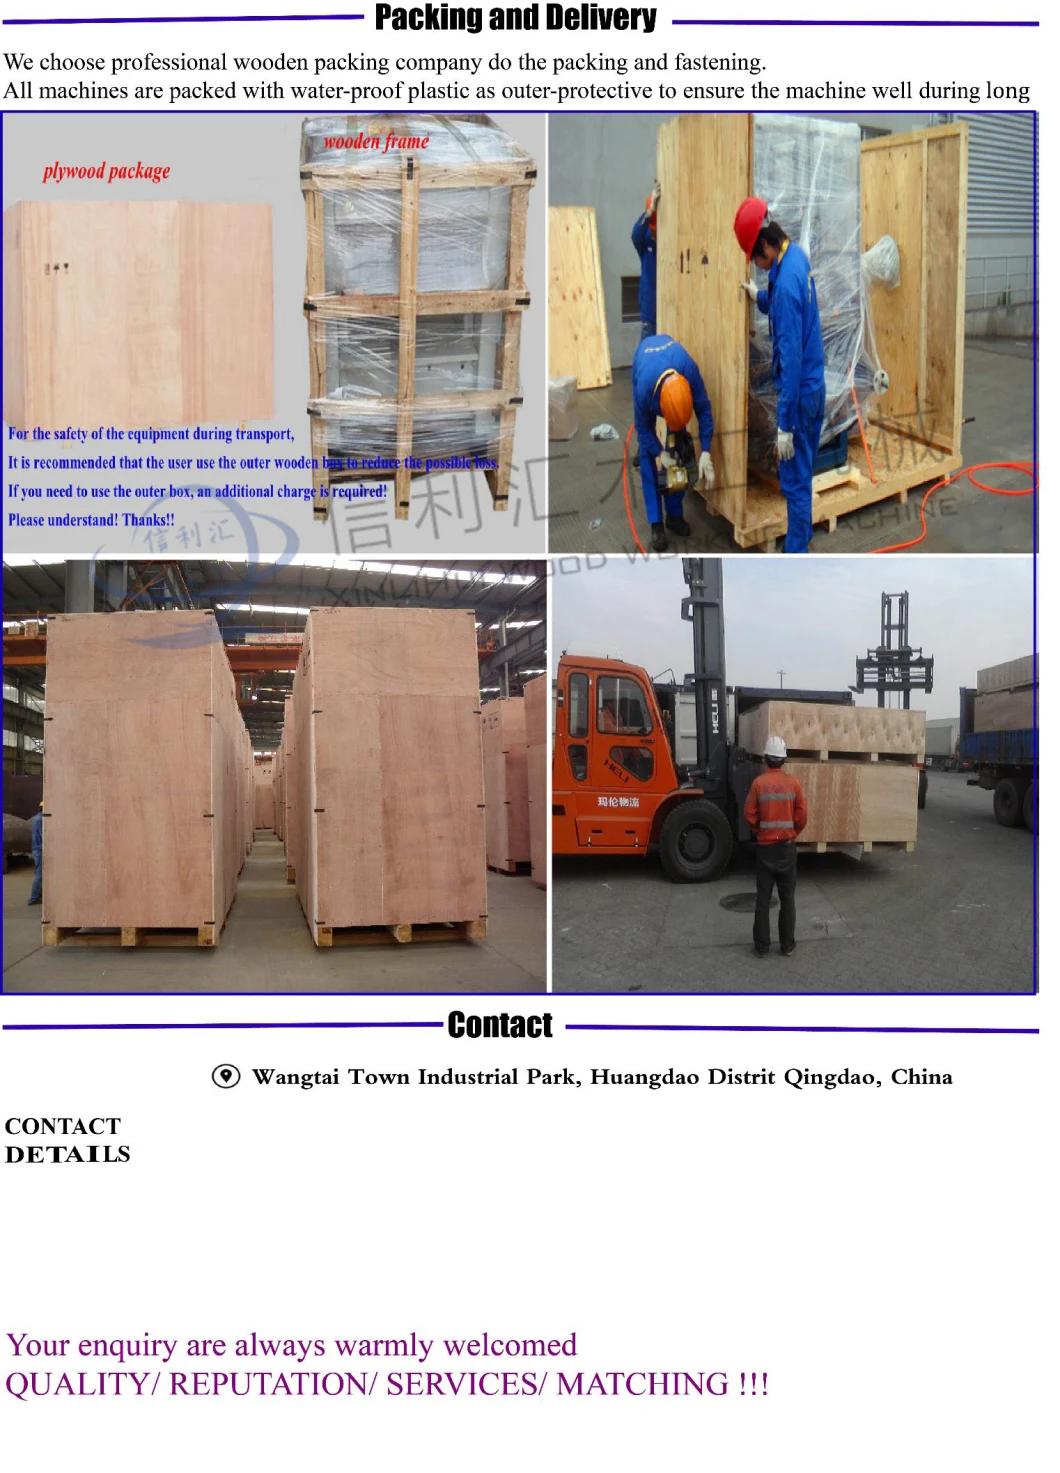 Two-Randed Carpenter Drilling Machine More Longer 3400mm Inside / and Hand Auger Drilling in Wood Woodworking Equipment